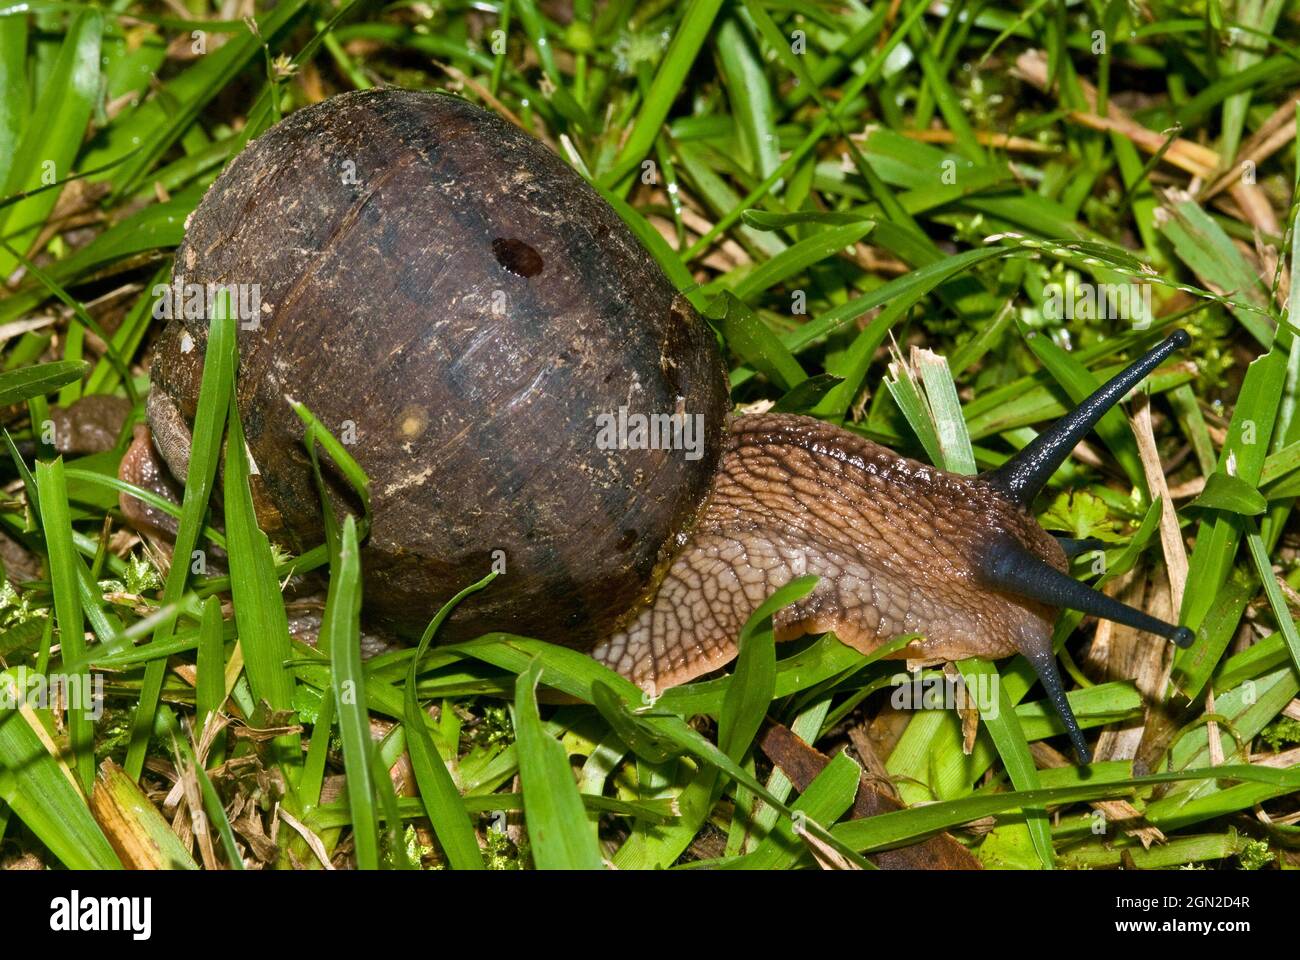 Giant panda snail (Hedleyella falconeri), This caryodid snail is Australia’s largest native land snail, with shell growth of up to 9 or 10 cm. Stock Photo